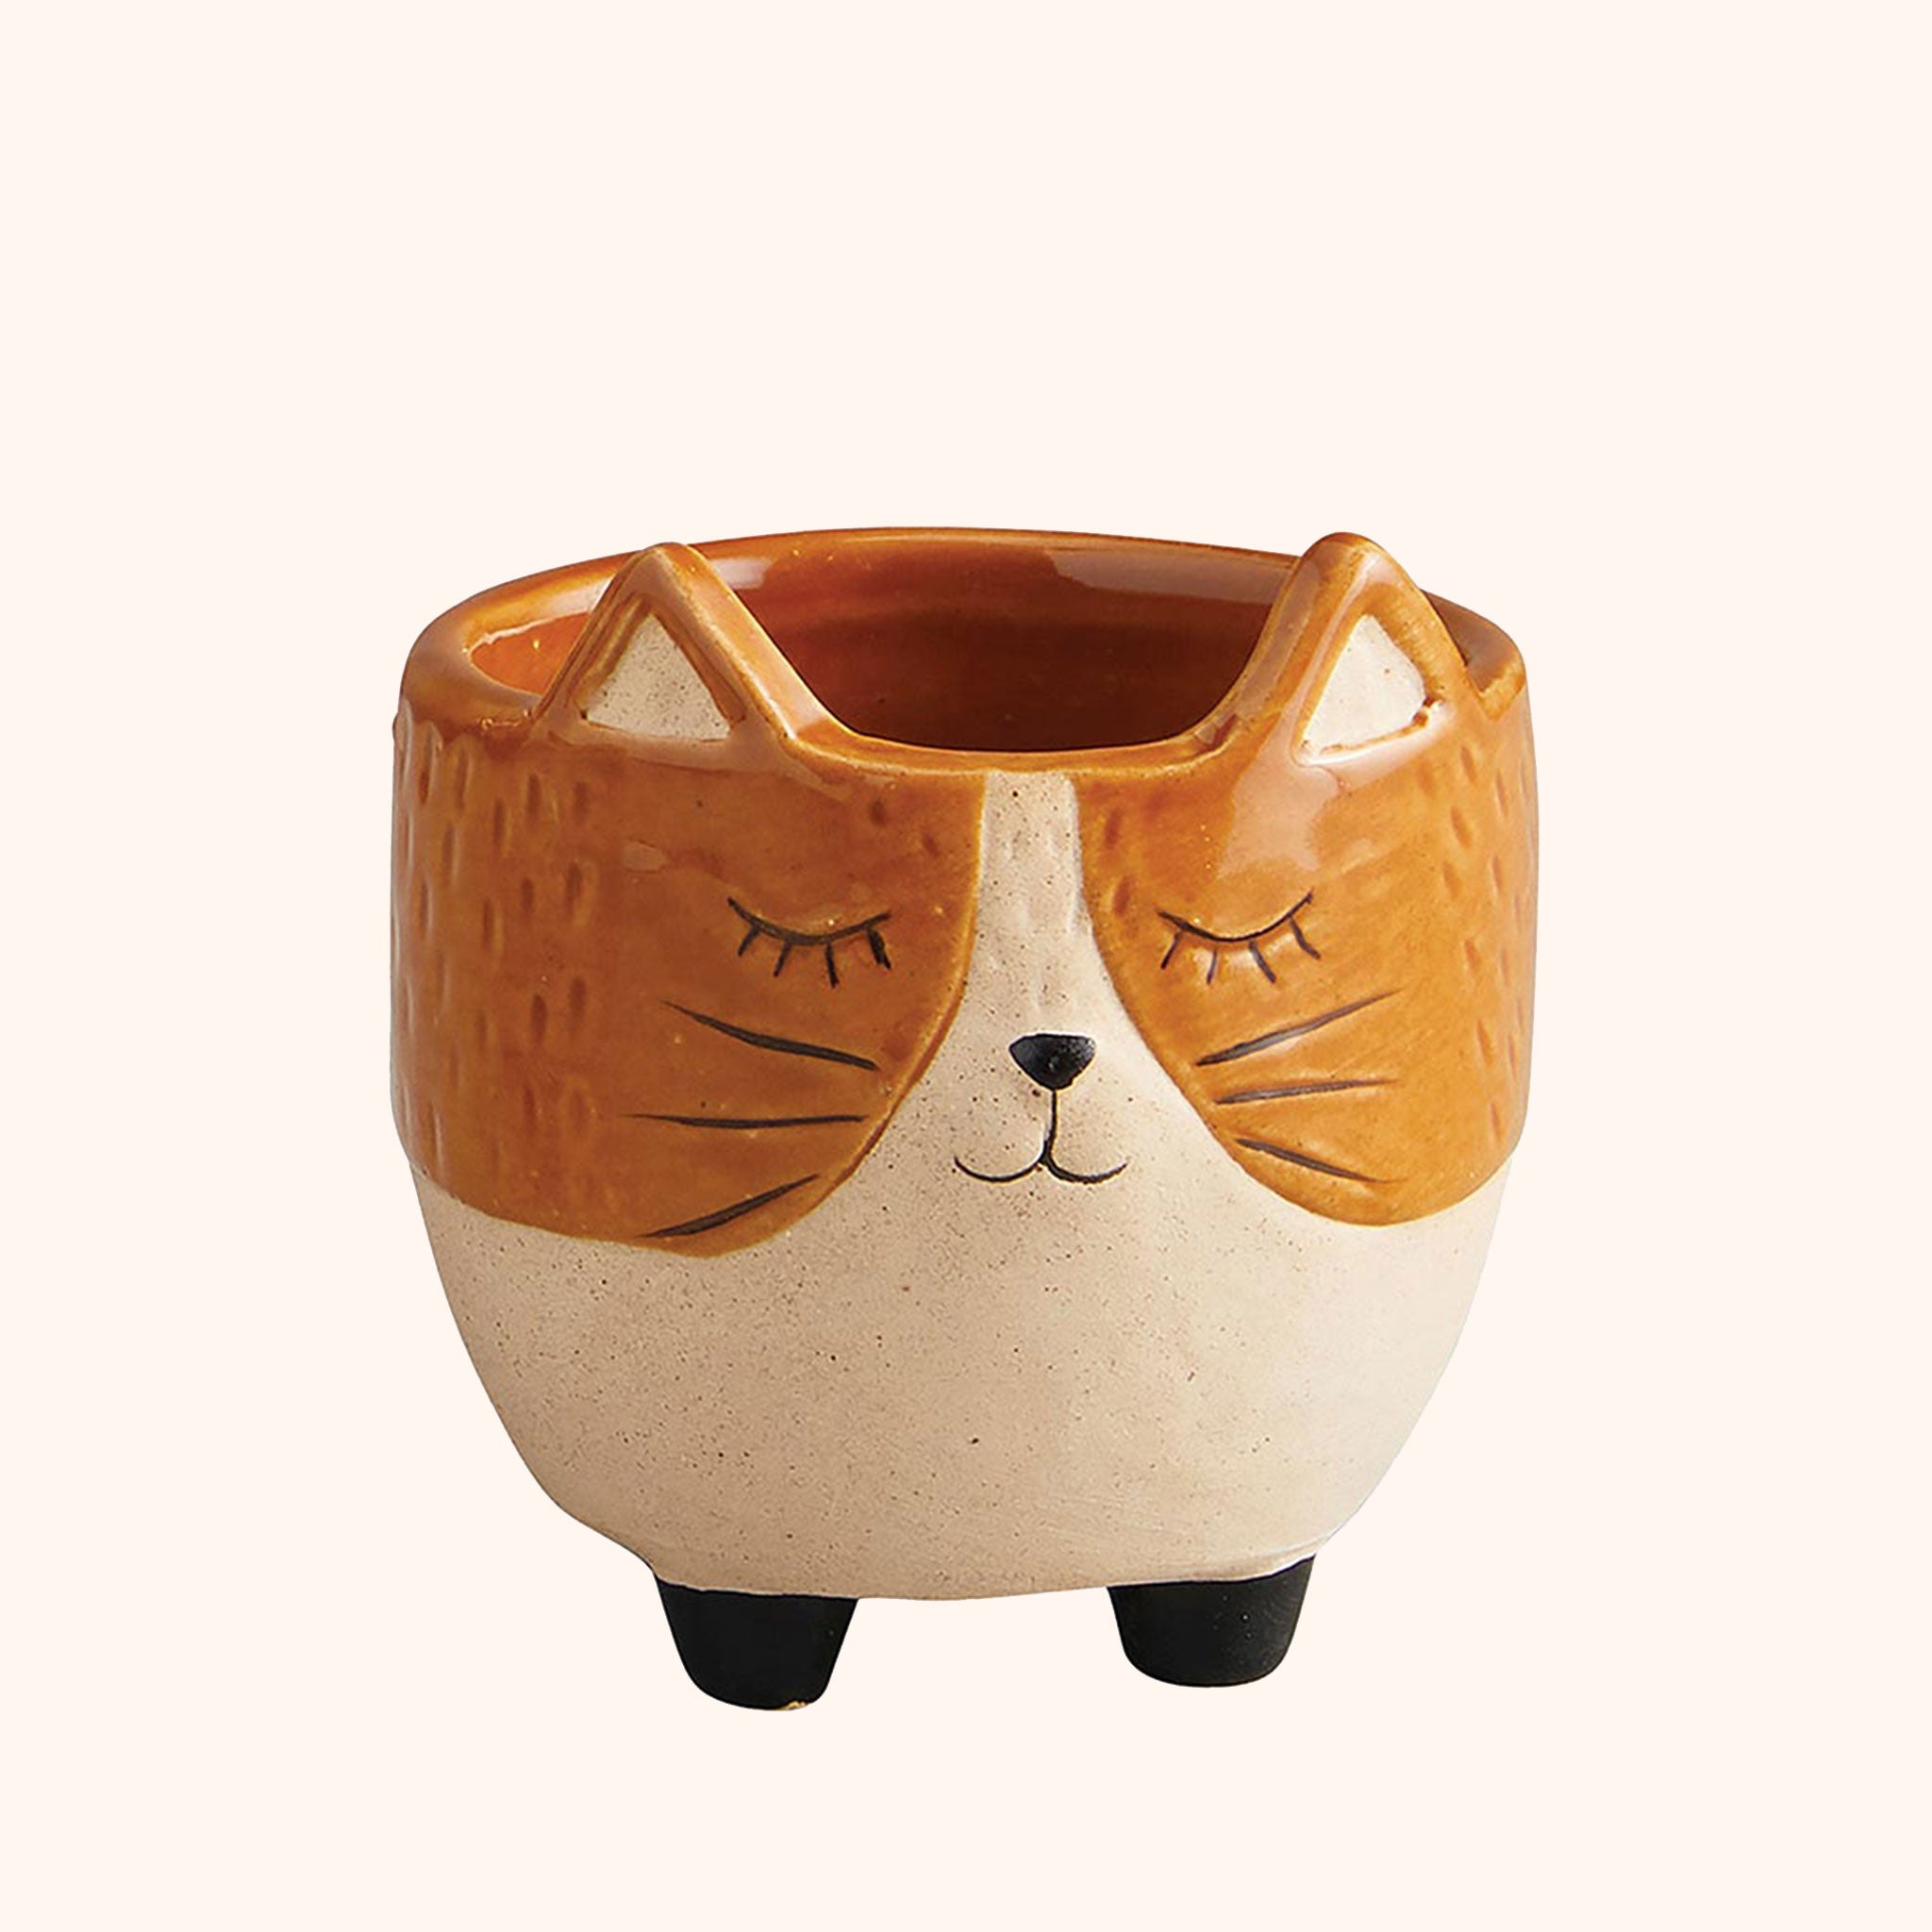 On a neutral background is a ceramic planter in ivory and orange with a cat face on the front. 